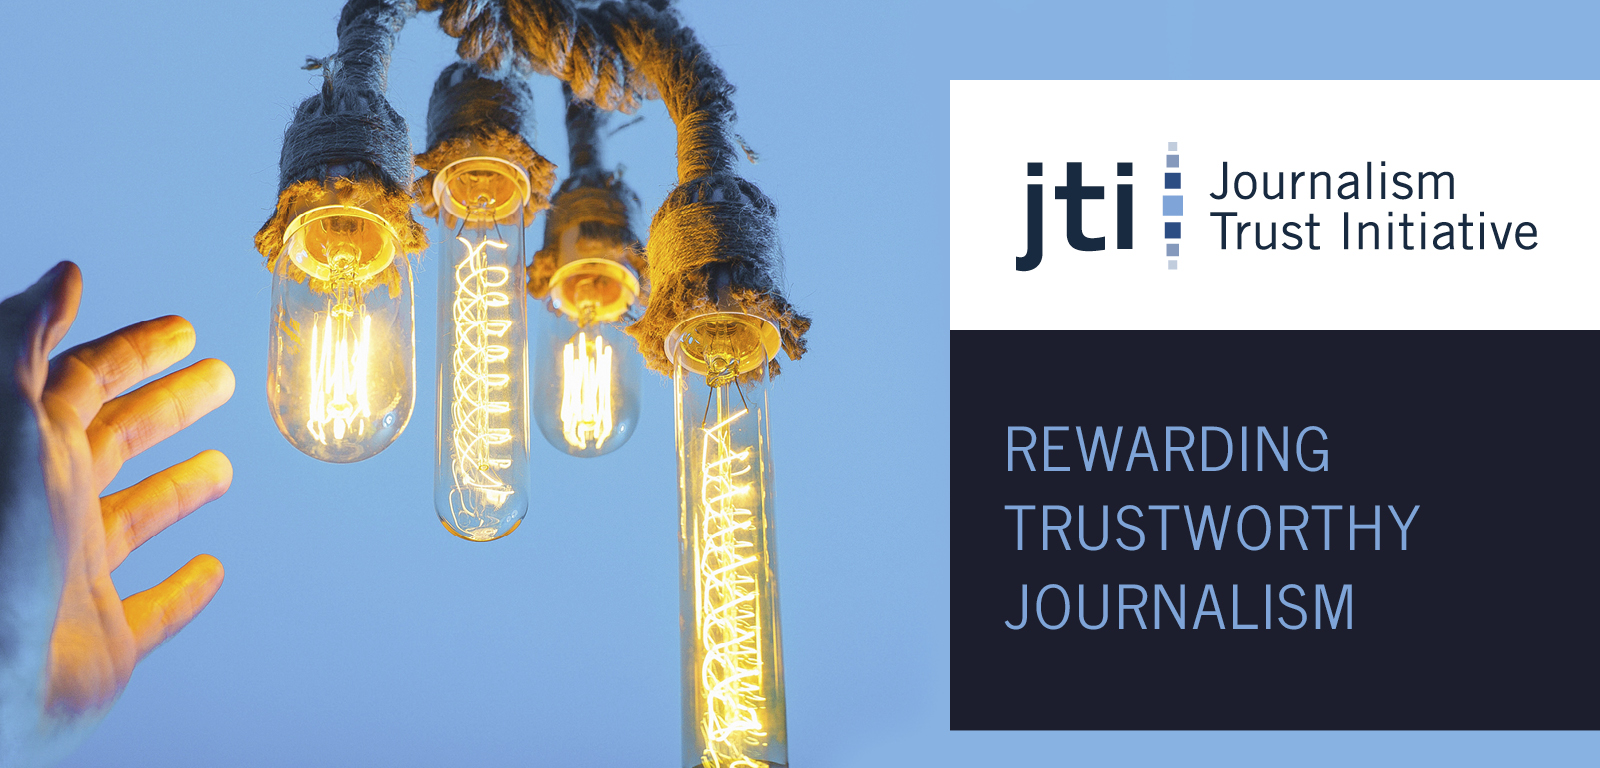 Medium blue background with light colored hand reaching toward several light bulbs. A darker blue box with the logo for the Journalism Trust Initiative and the phrase "Rewarding Trustworthy Journalism"